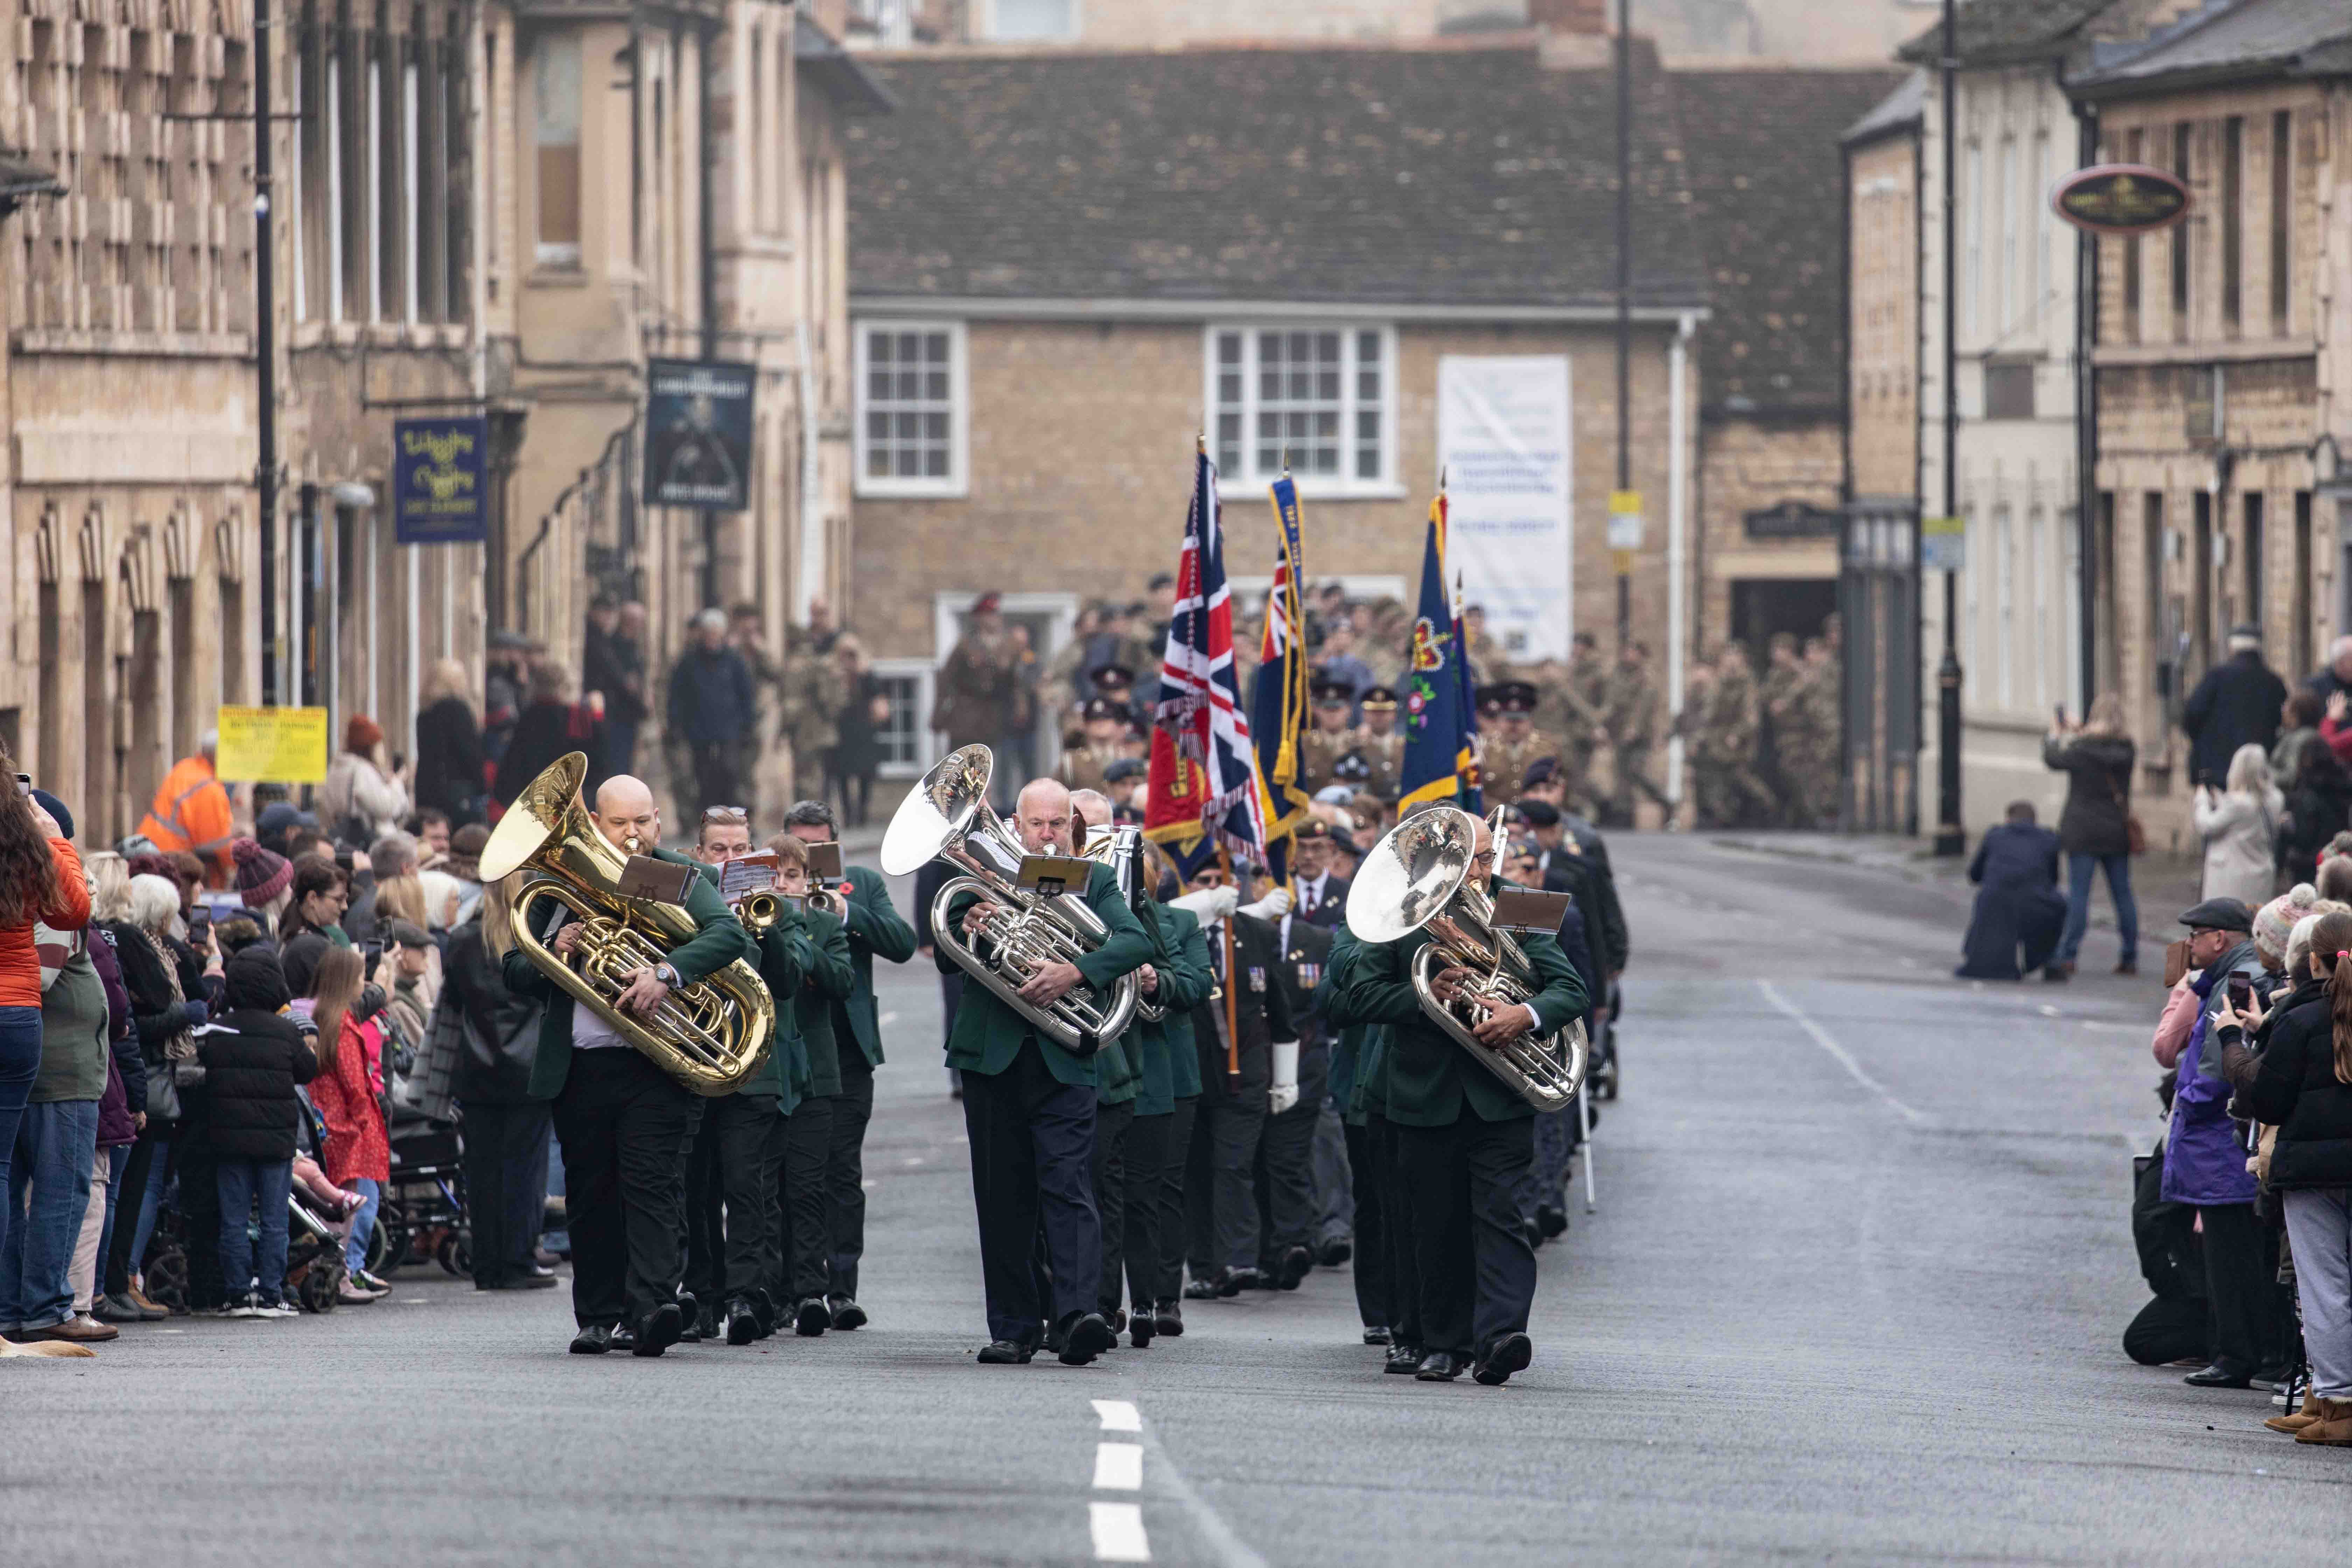 Broad Street in Stamford on Remembrance Sunday